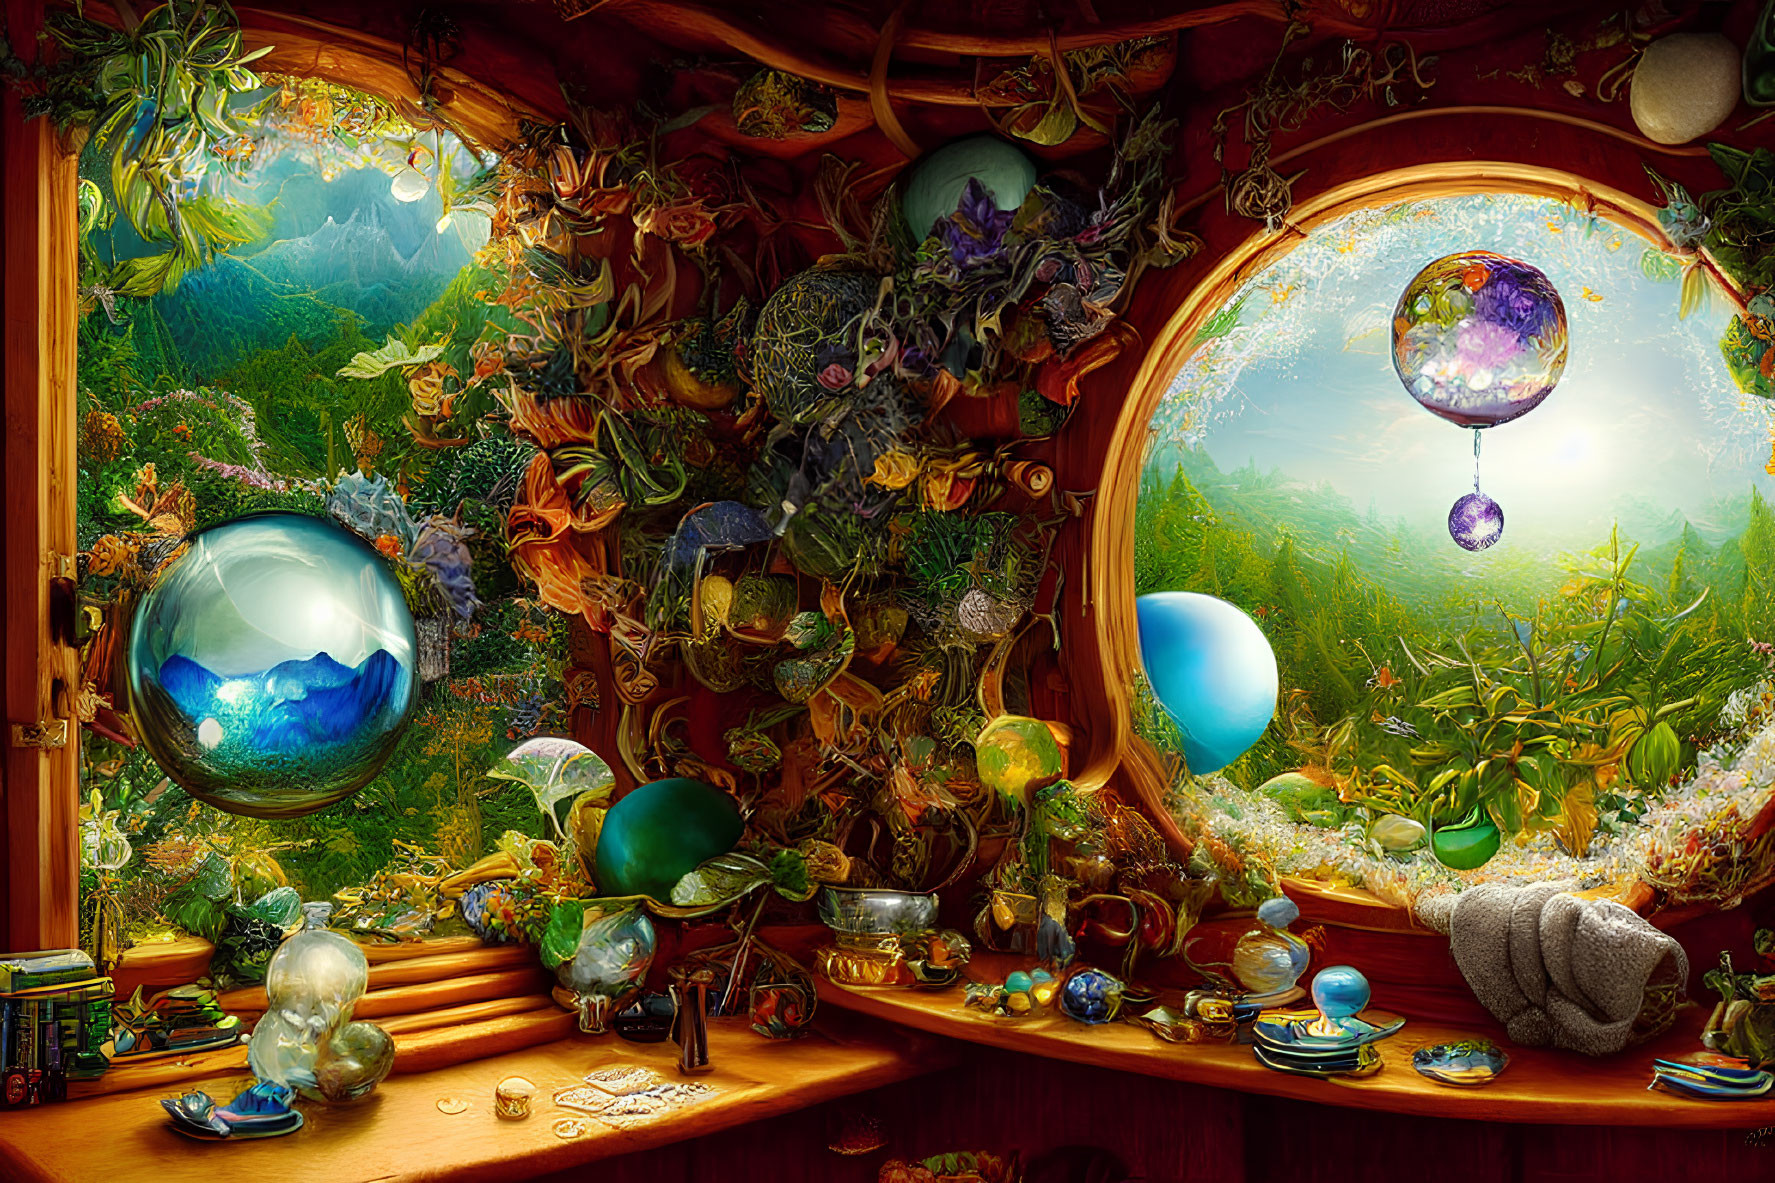 Interior scene with floating crystals, greenery, glass orbs, and vintage objects